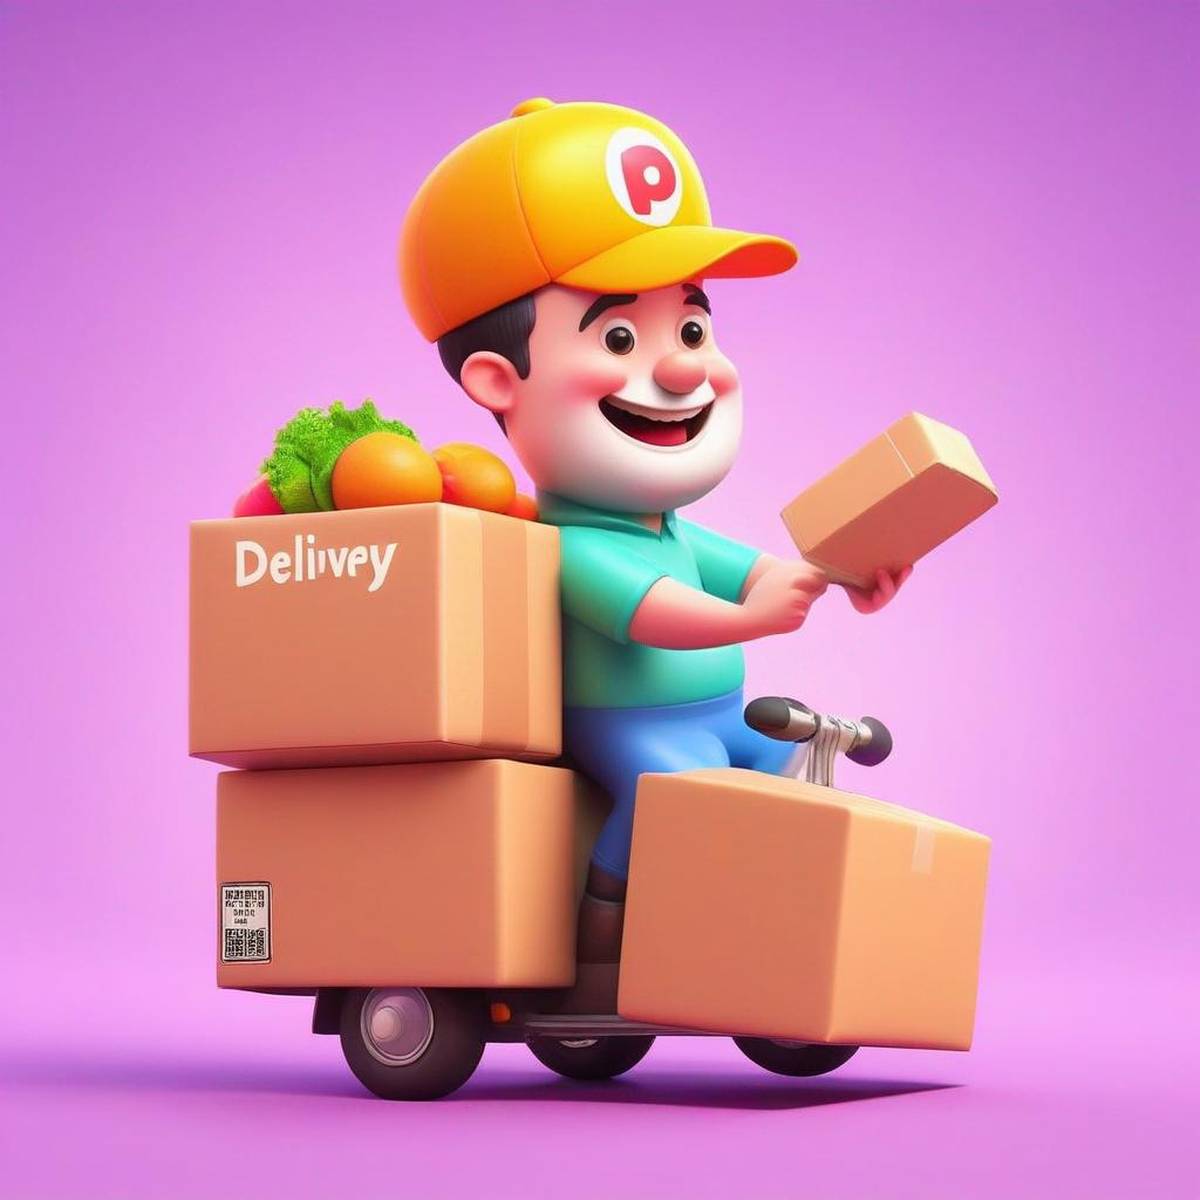 Delivery puns